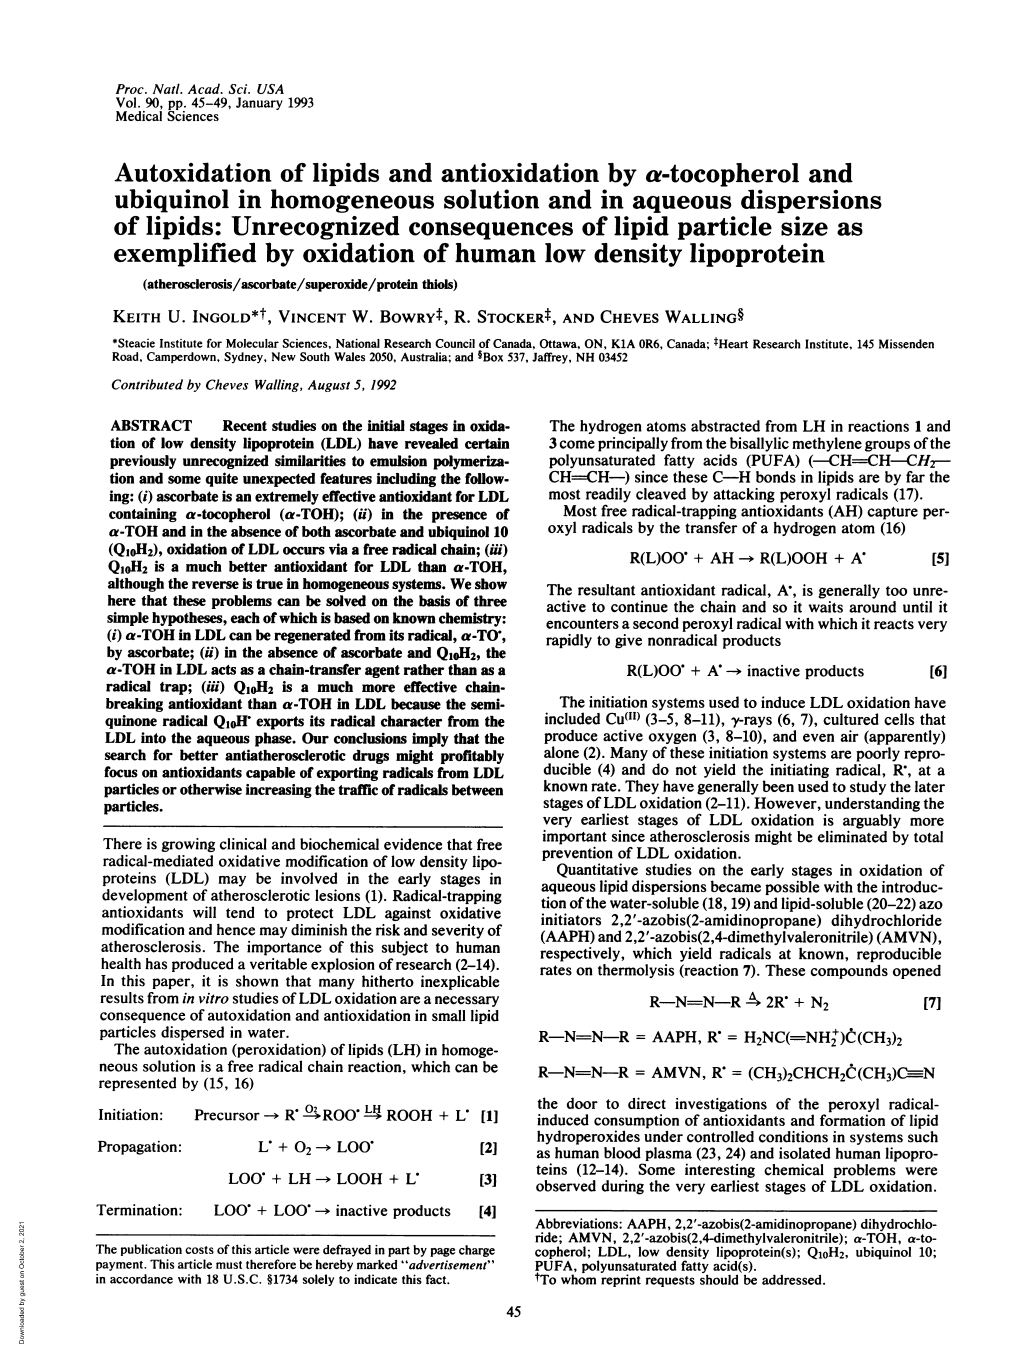 Autoxidation of Lipids and Antioxidation by A-Tocopherol And